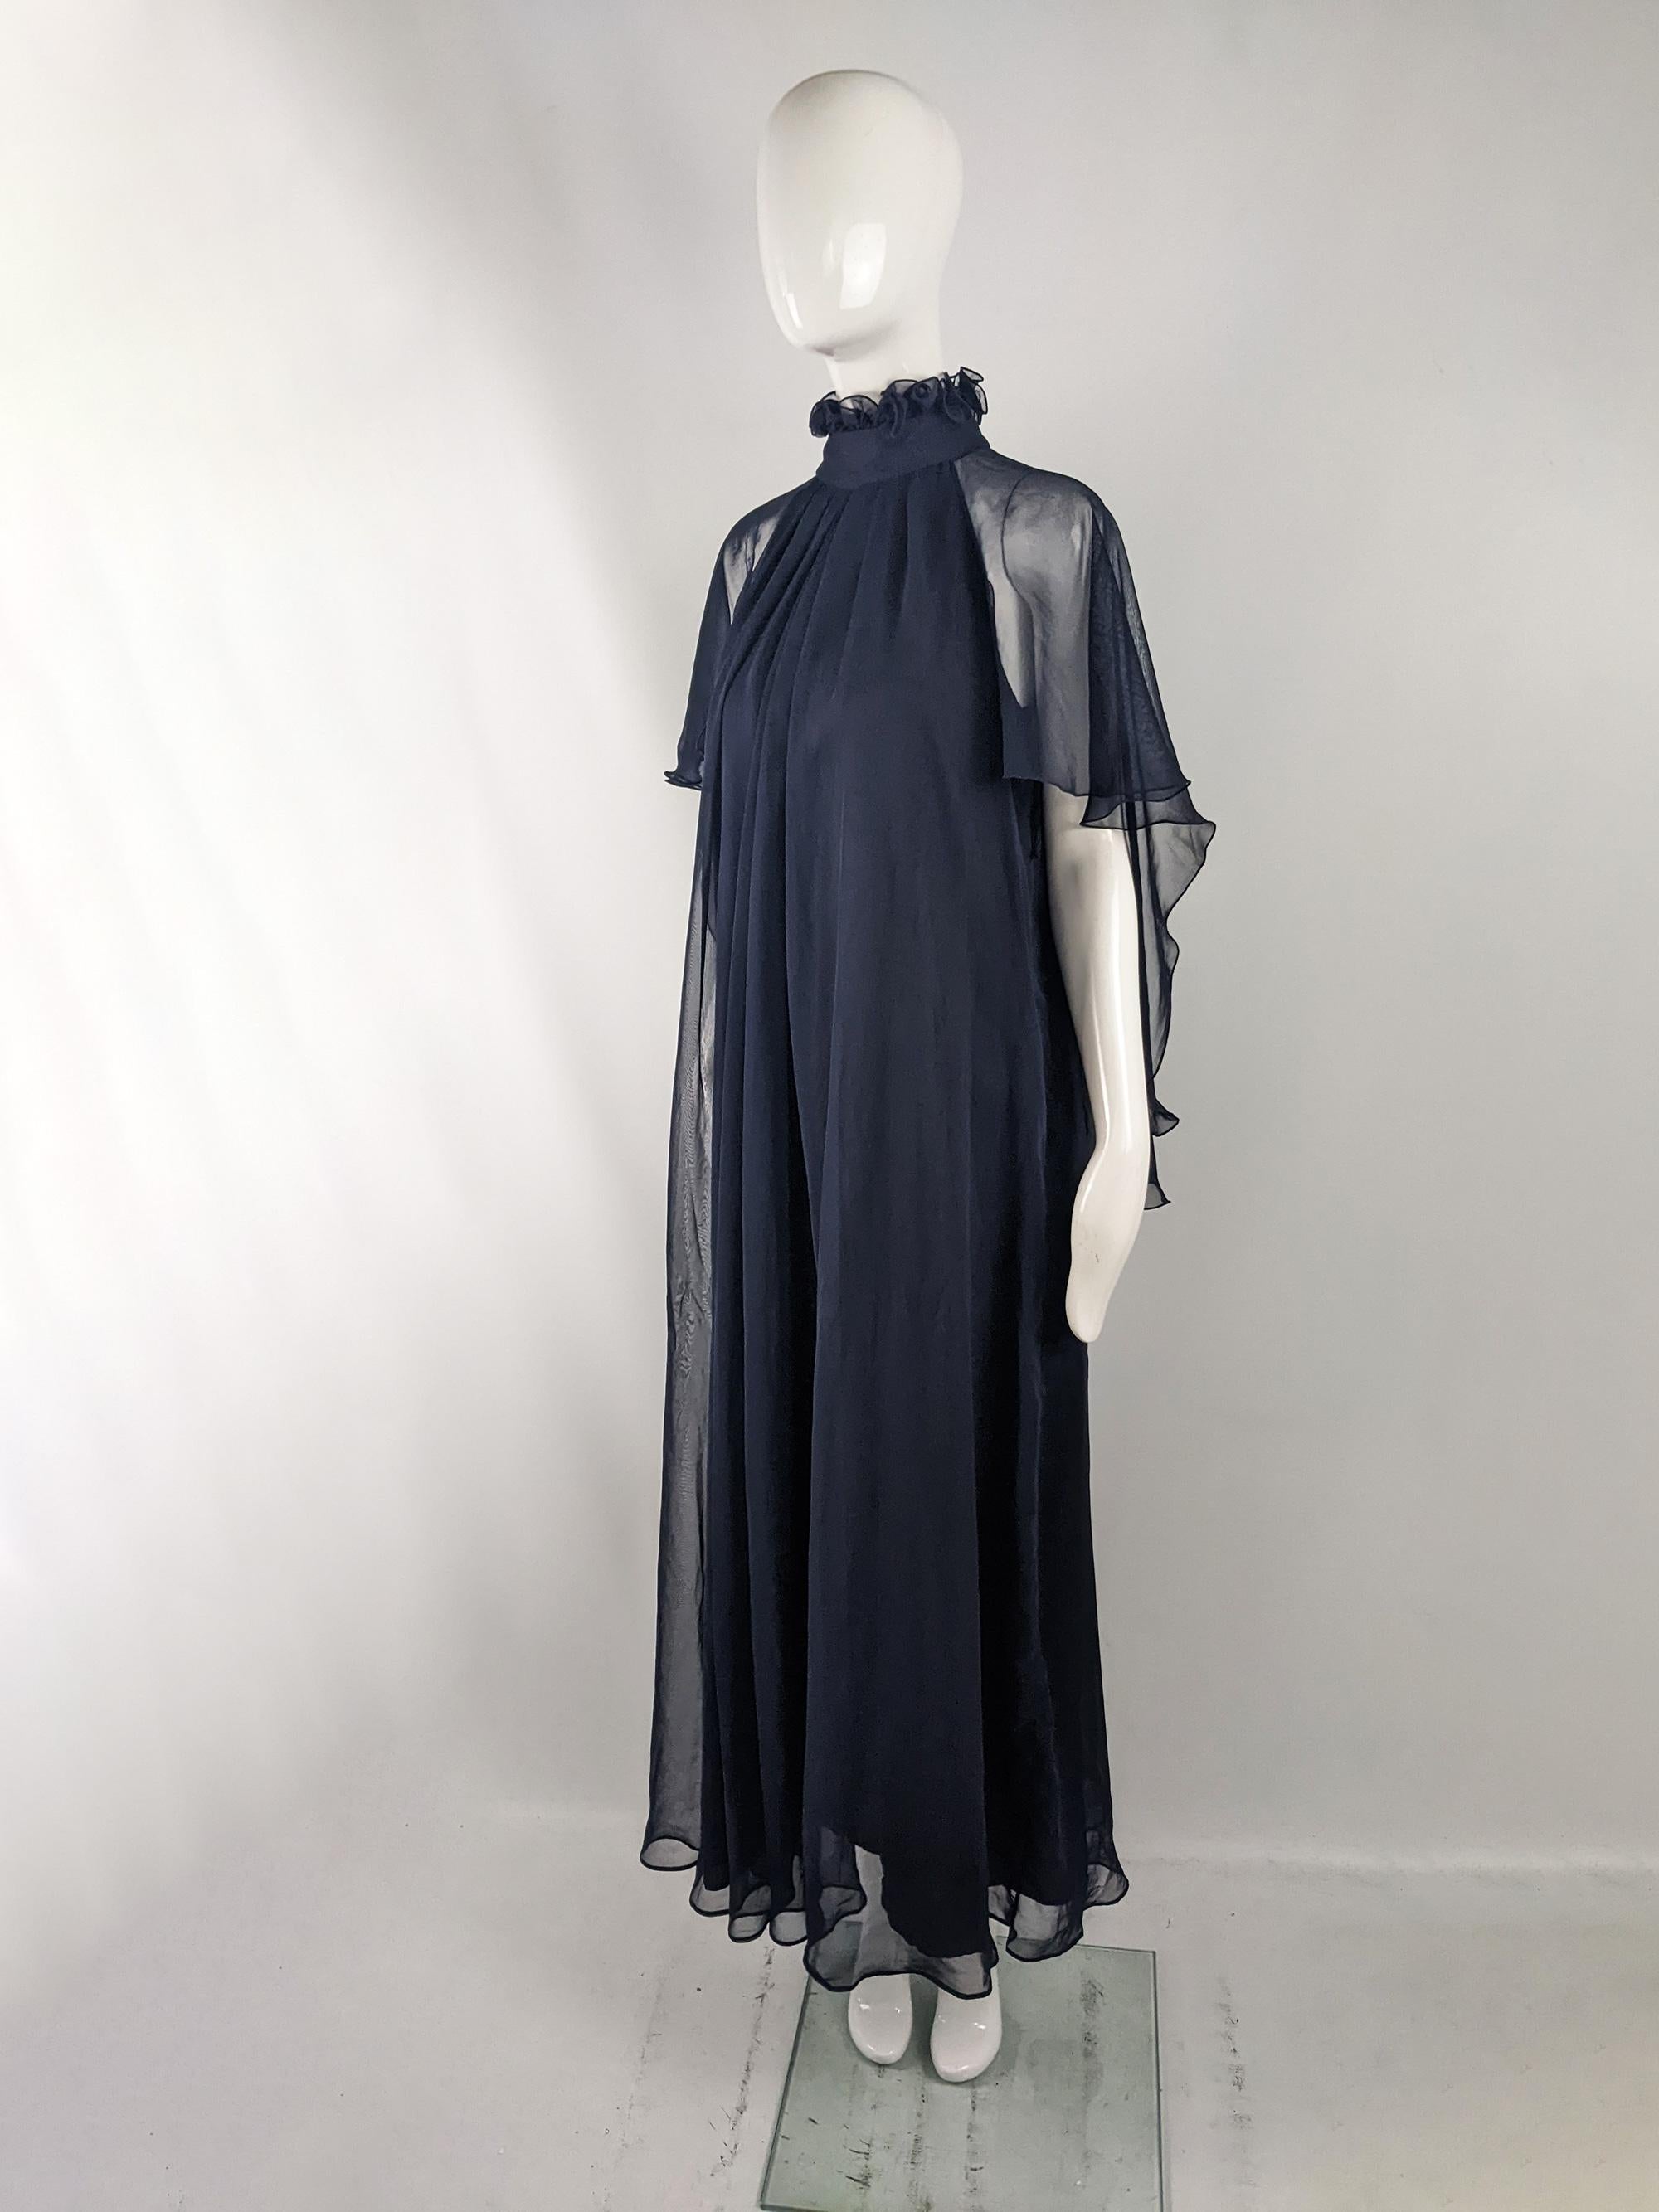 Jean Varon Vintage 1970s Navy Blue Chiffon Dress Cape Sleeves Evening Gown In Fair Condition For Sale In Doncaster, South Yorkshire